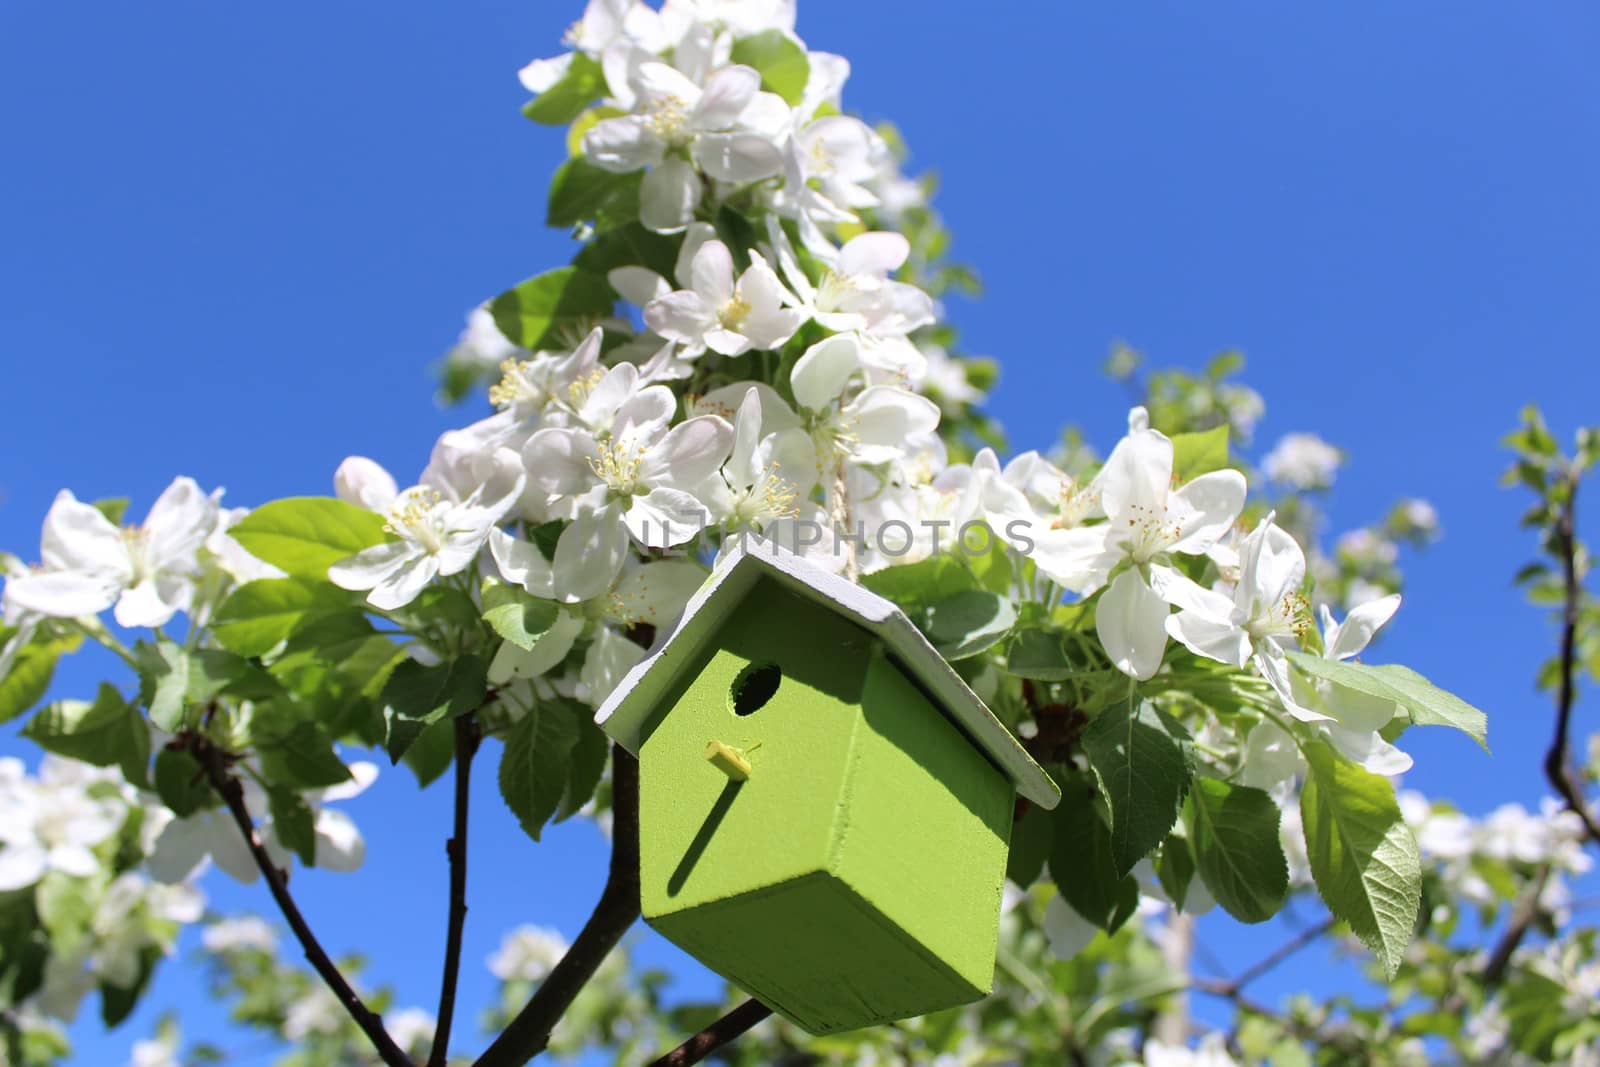 The picture shows a birdhouse in the blossoming apple tree.